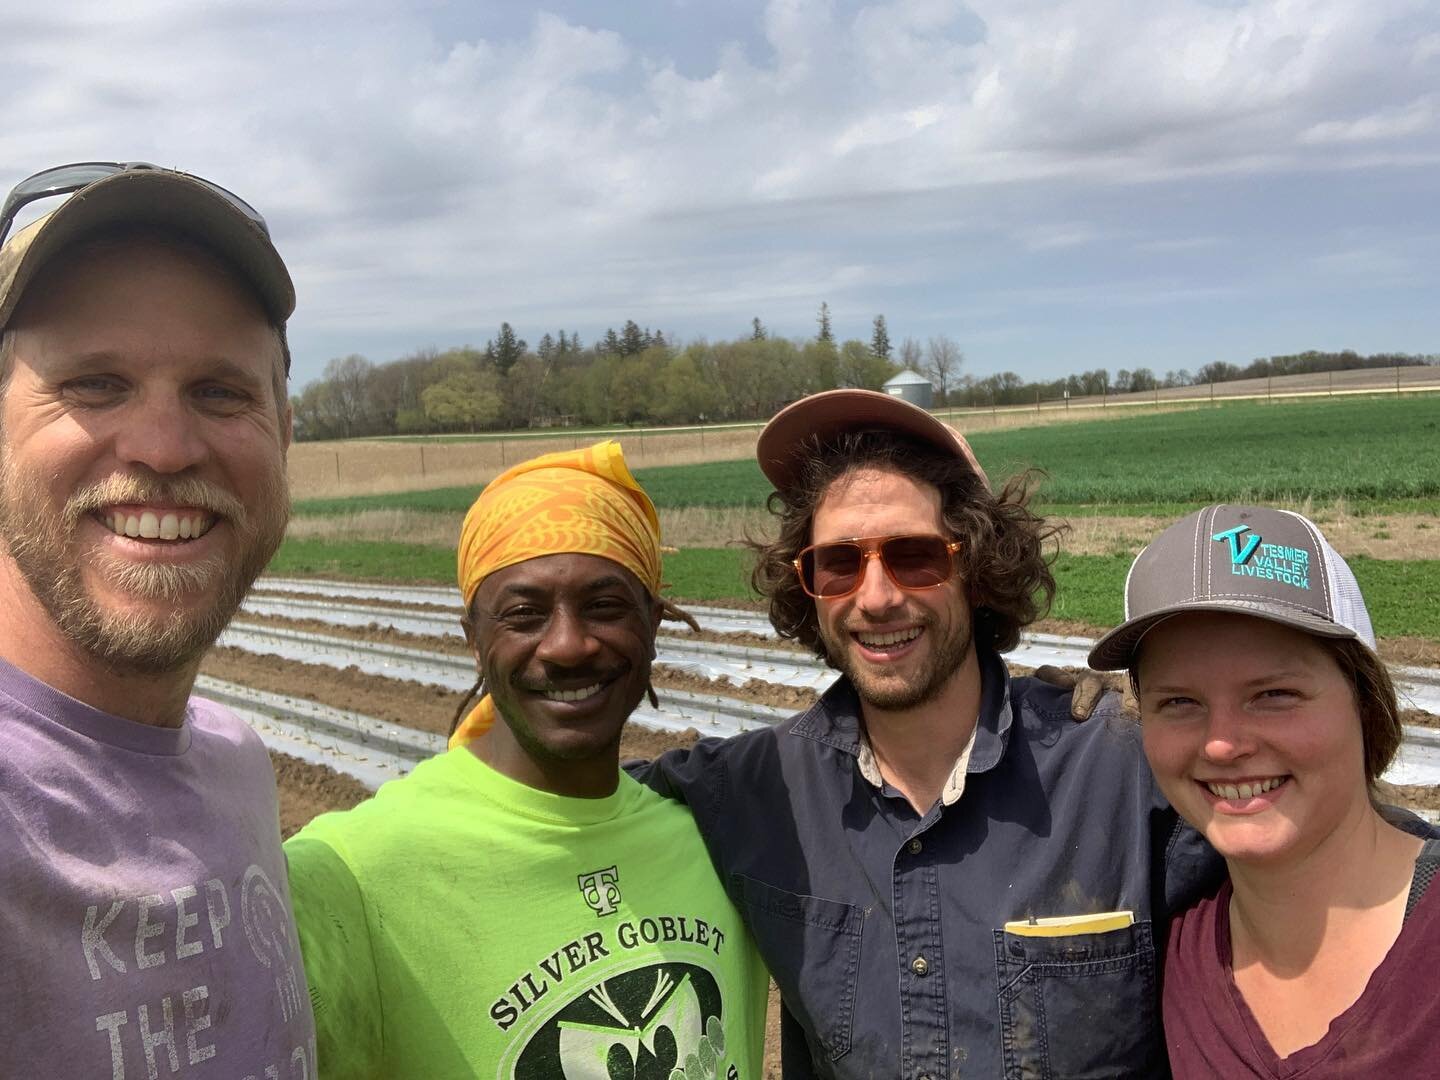 Meet our 2022 crew: Joshua, Stephen, and Kara. They&rsquo;ve been kicking butt in the greenhouse for the past couple of months, but we were all excited to finally get into the field after such a cold, rainy spring. 

Today, we transplanted onions for